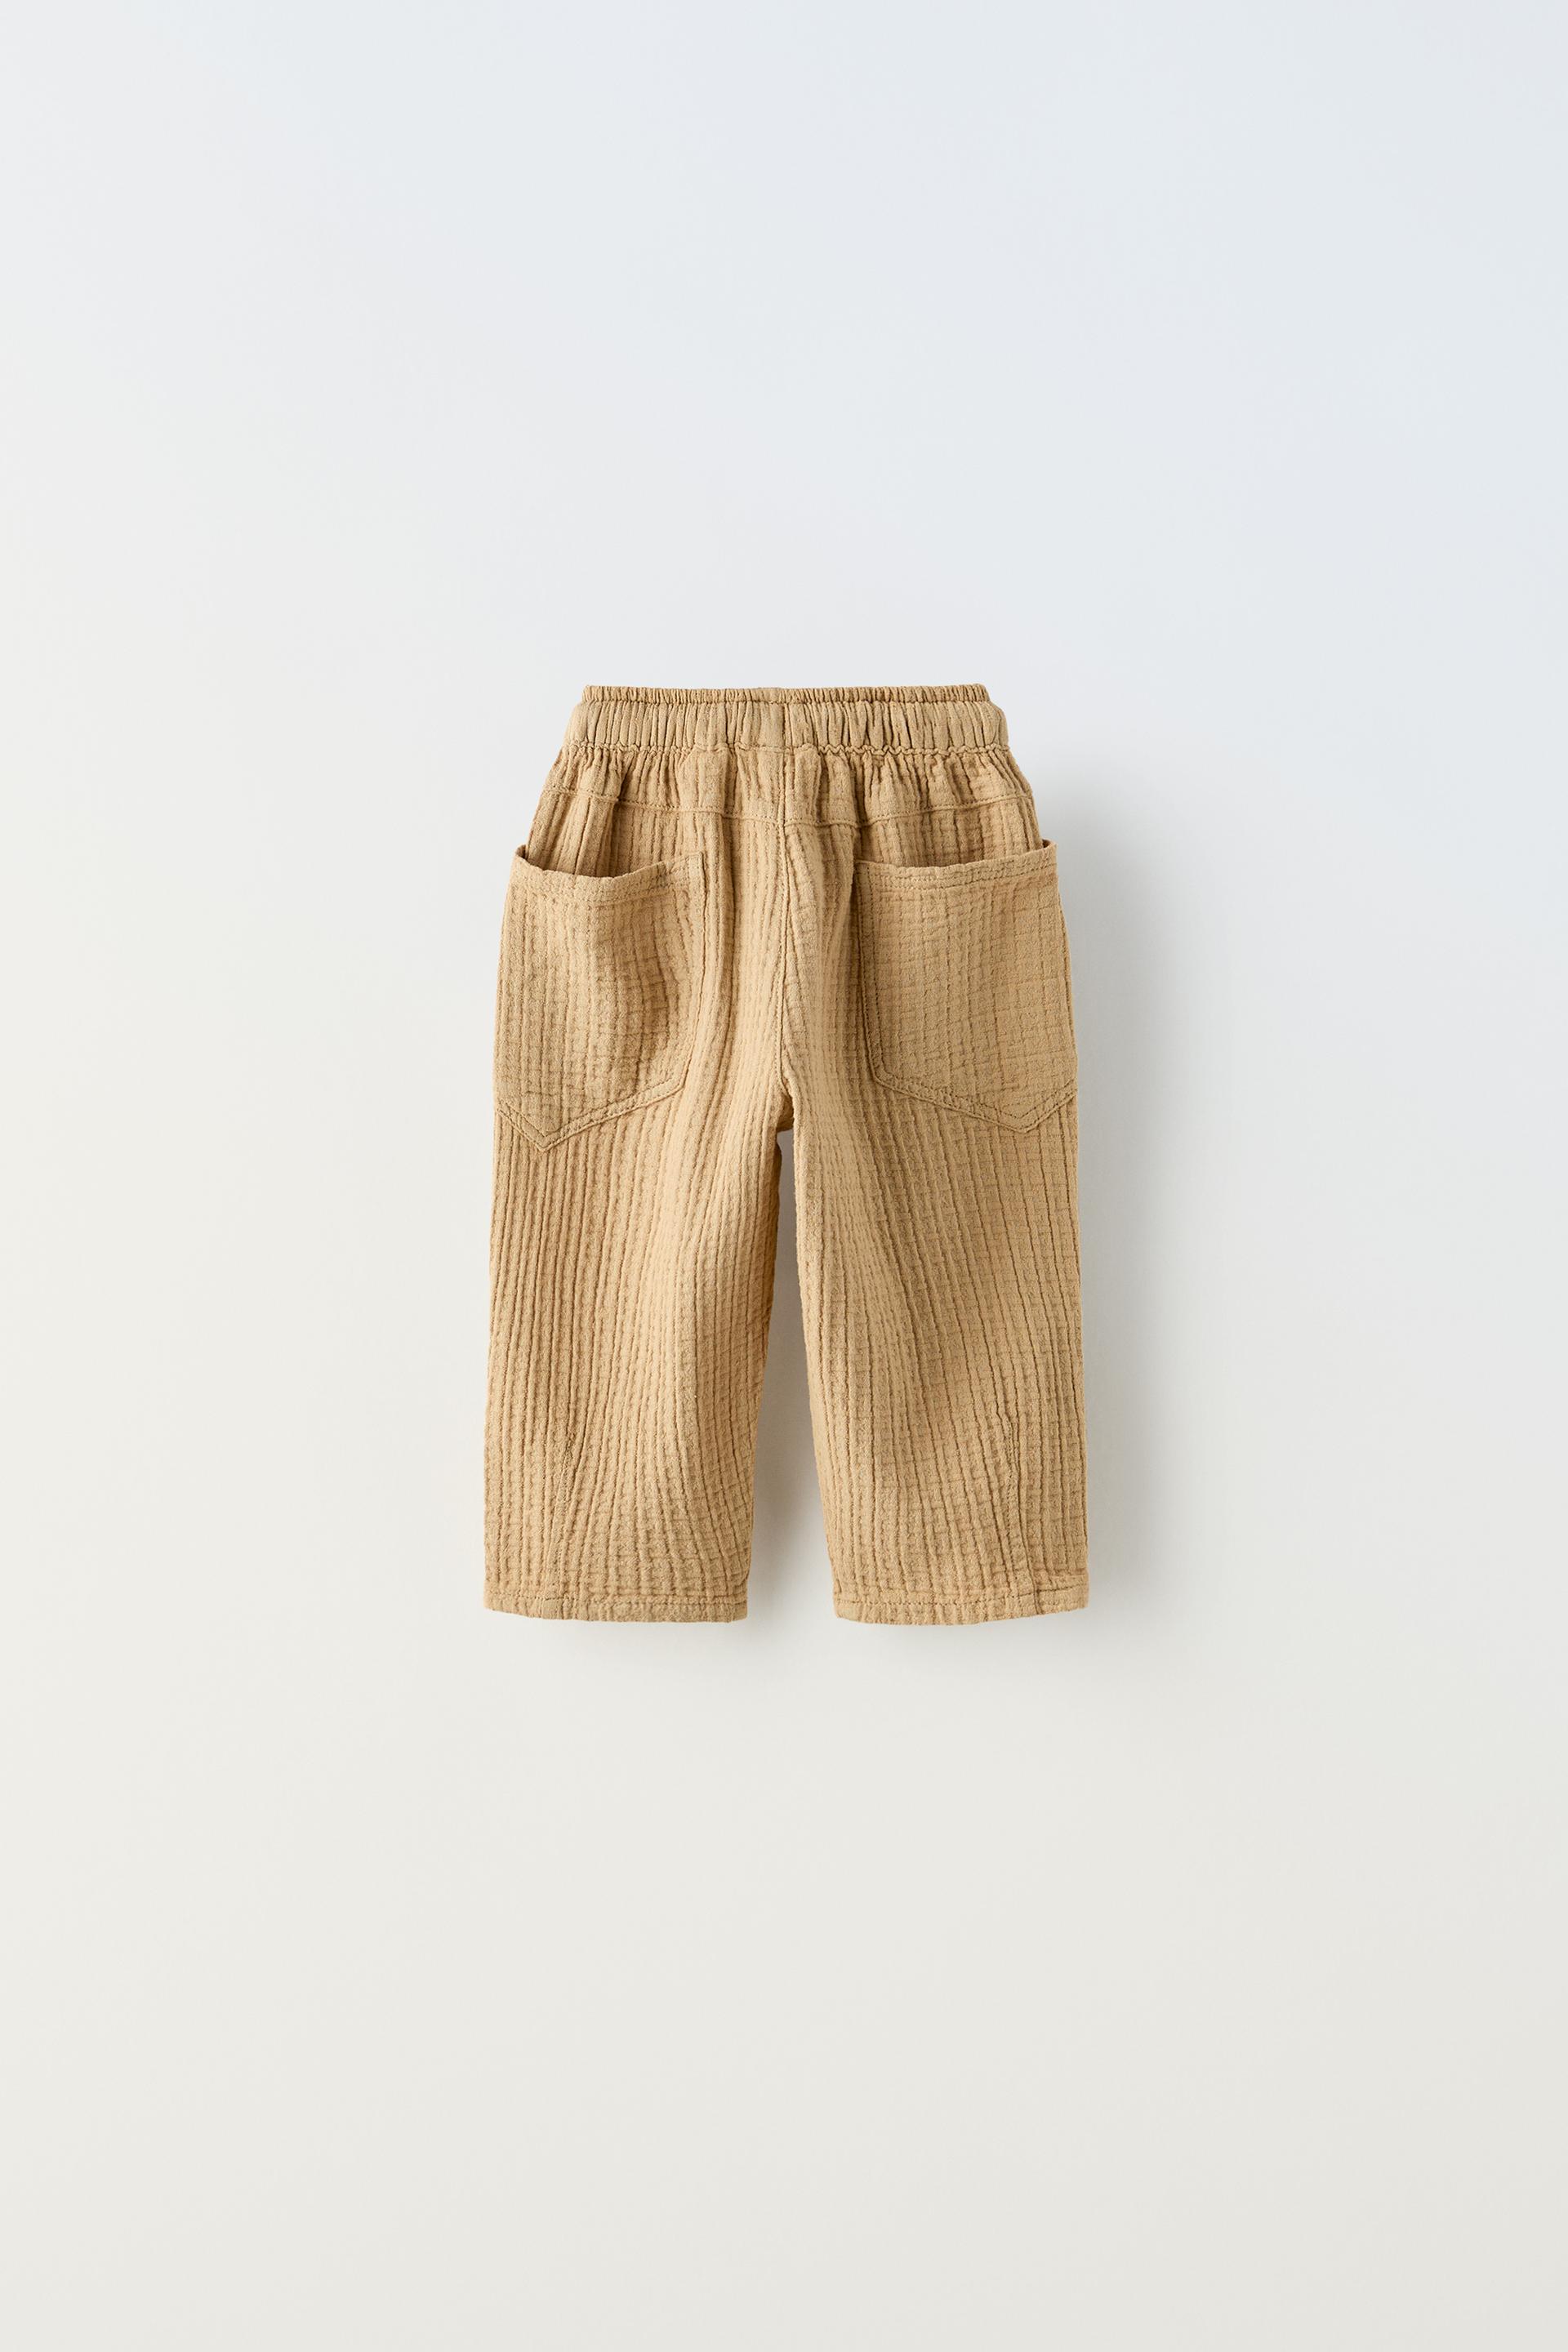 SOFT TOUCH RIBBED PANTS - Gray marl